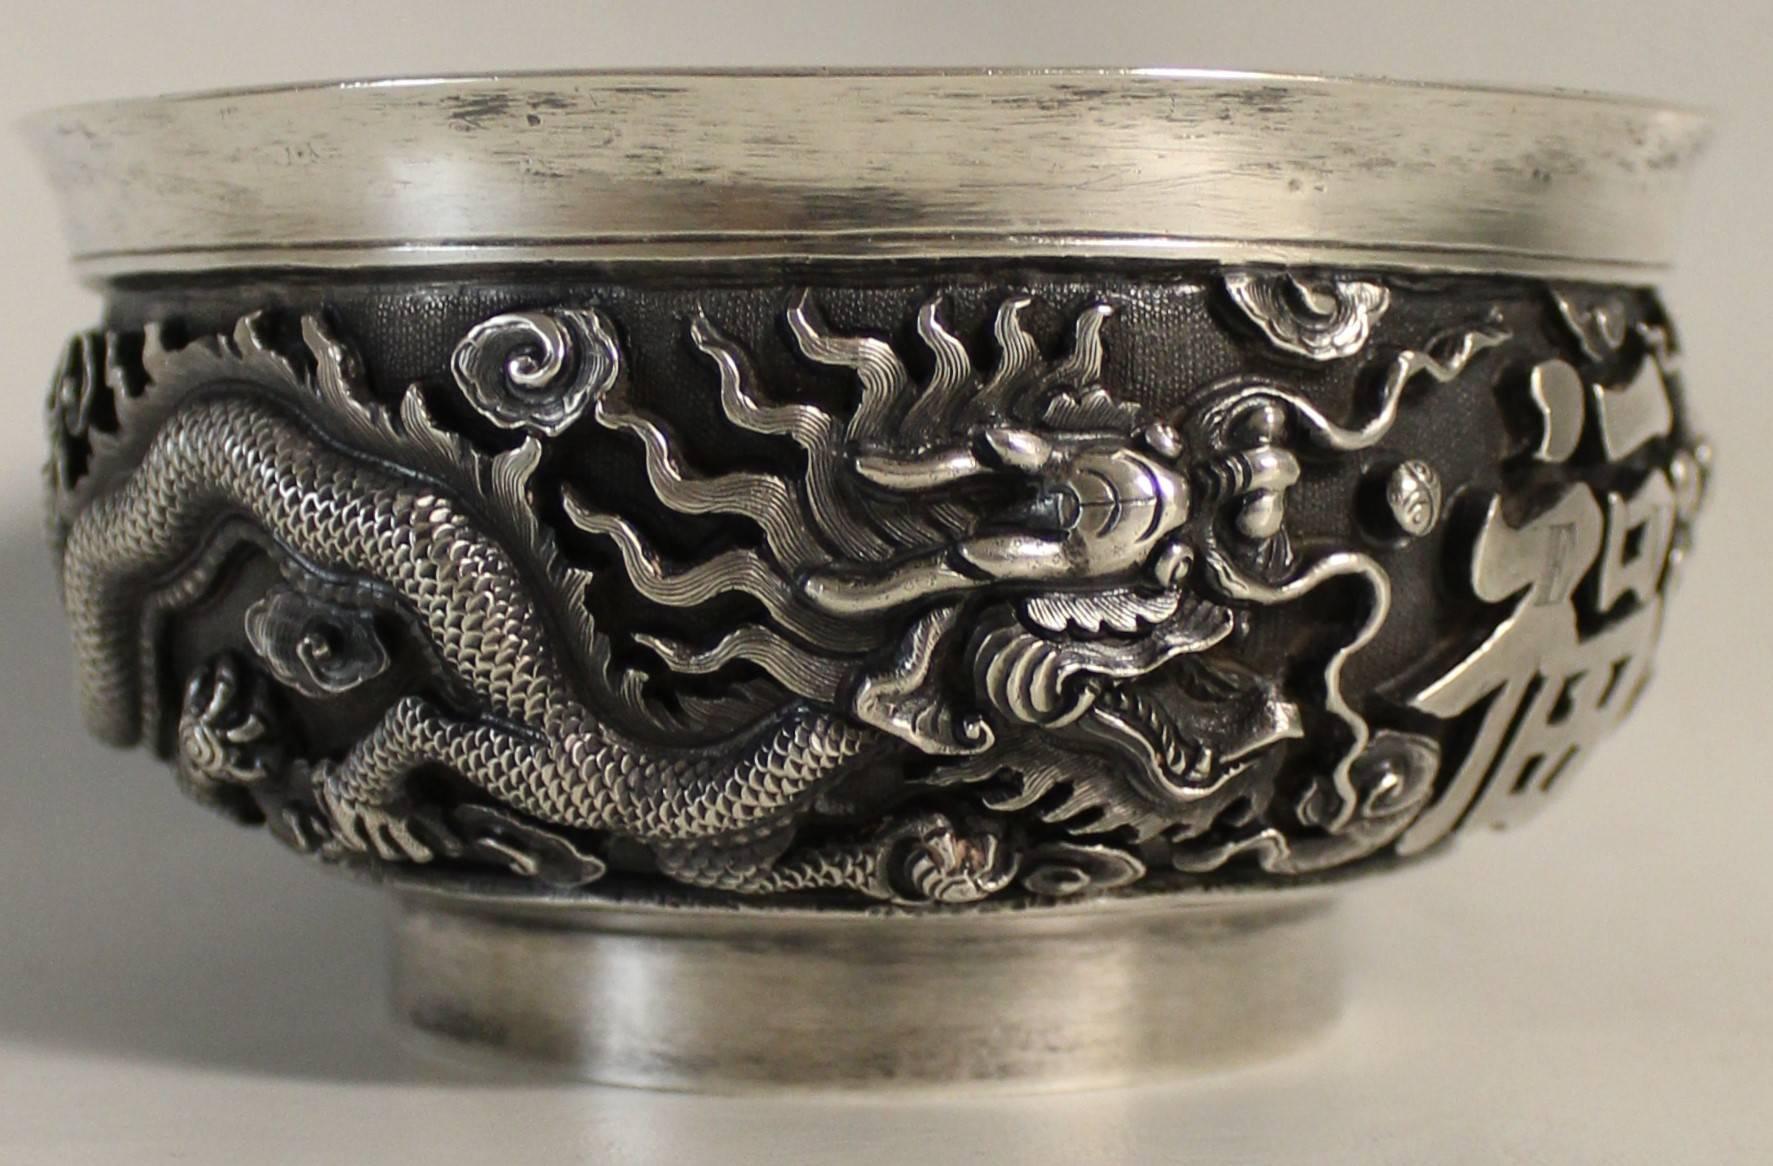 19th Century Chinese Export Silver Bowl, Plate & Seal Attributed to Tu Mao Xing 1